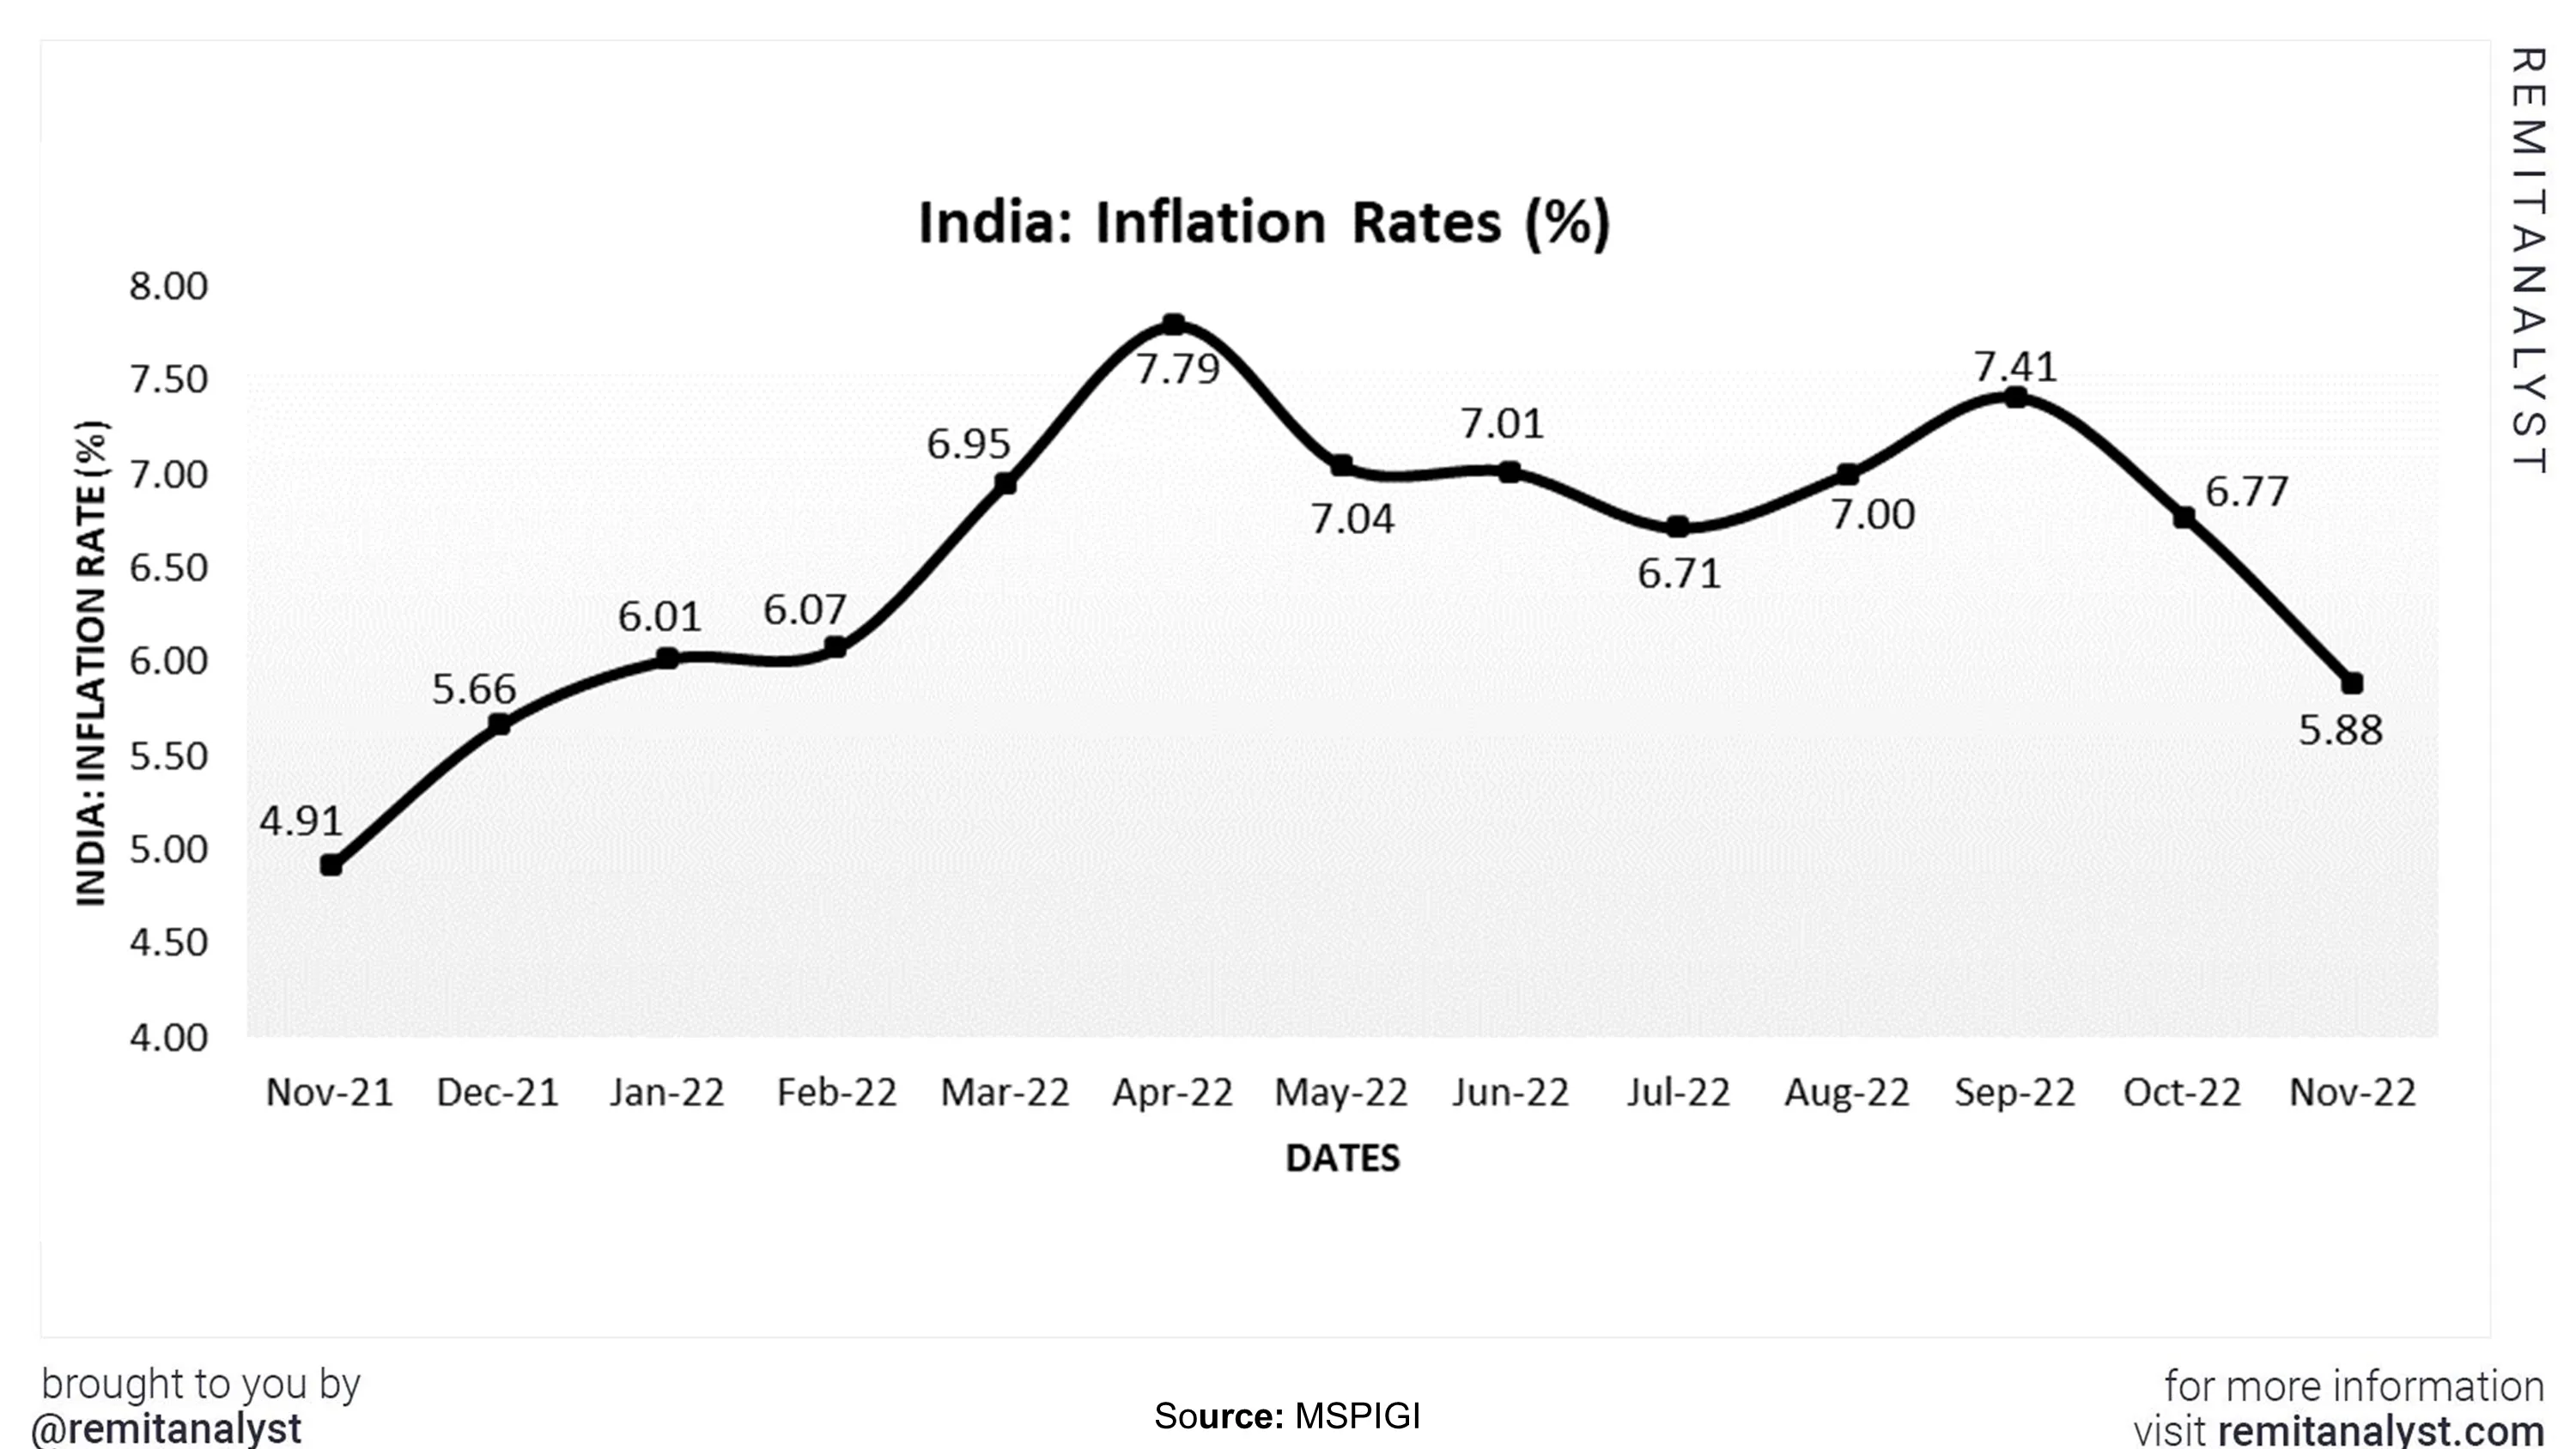 inflation-rates-in-india-from-nov-2021-to-nov-2022